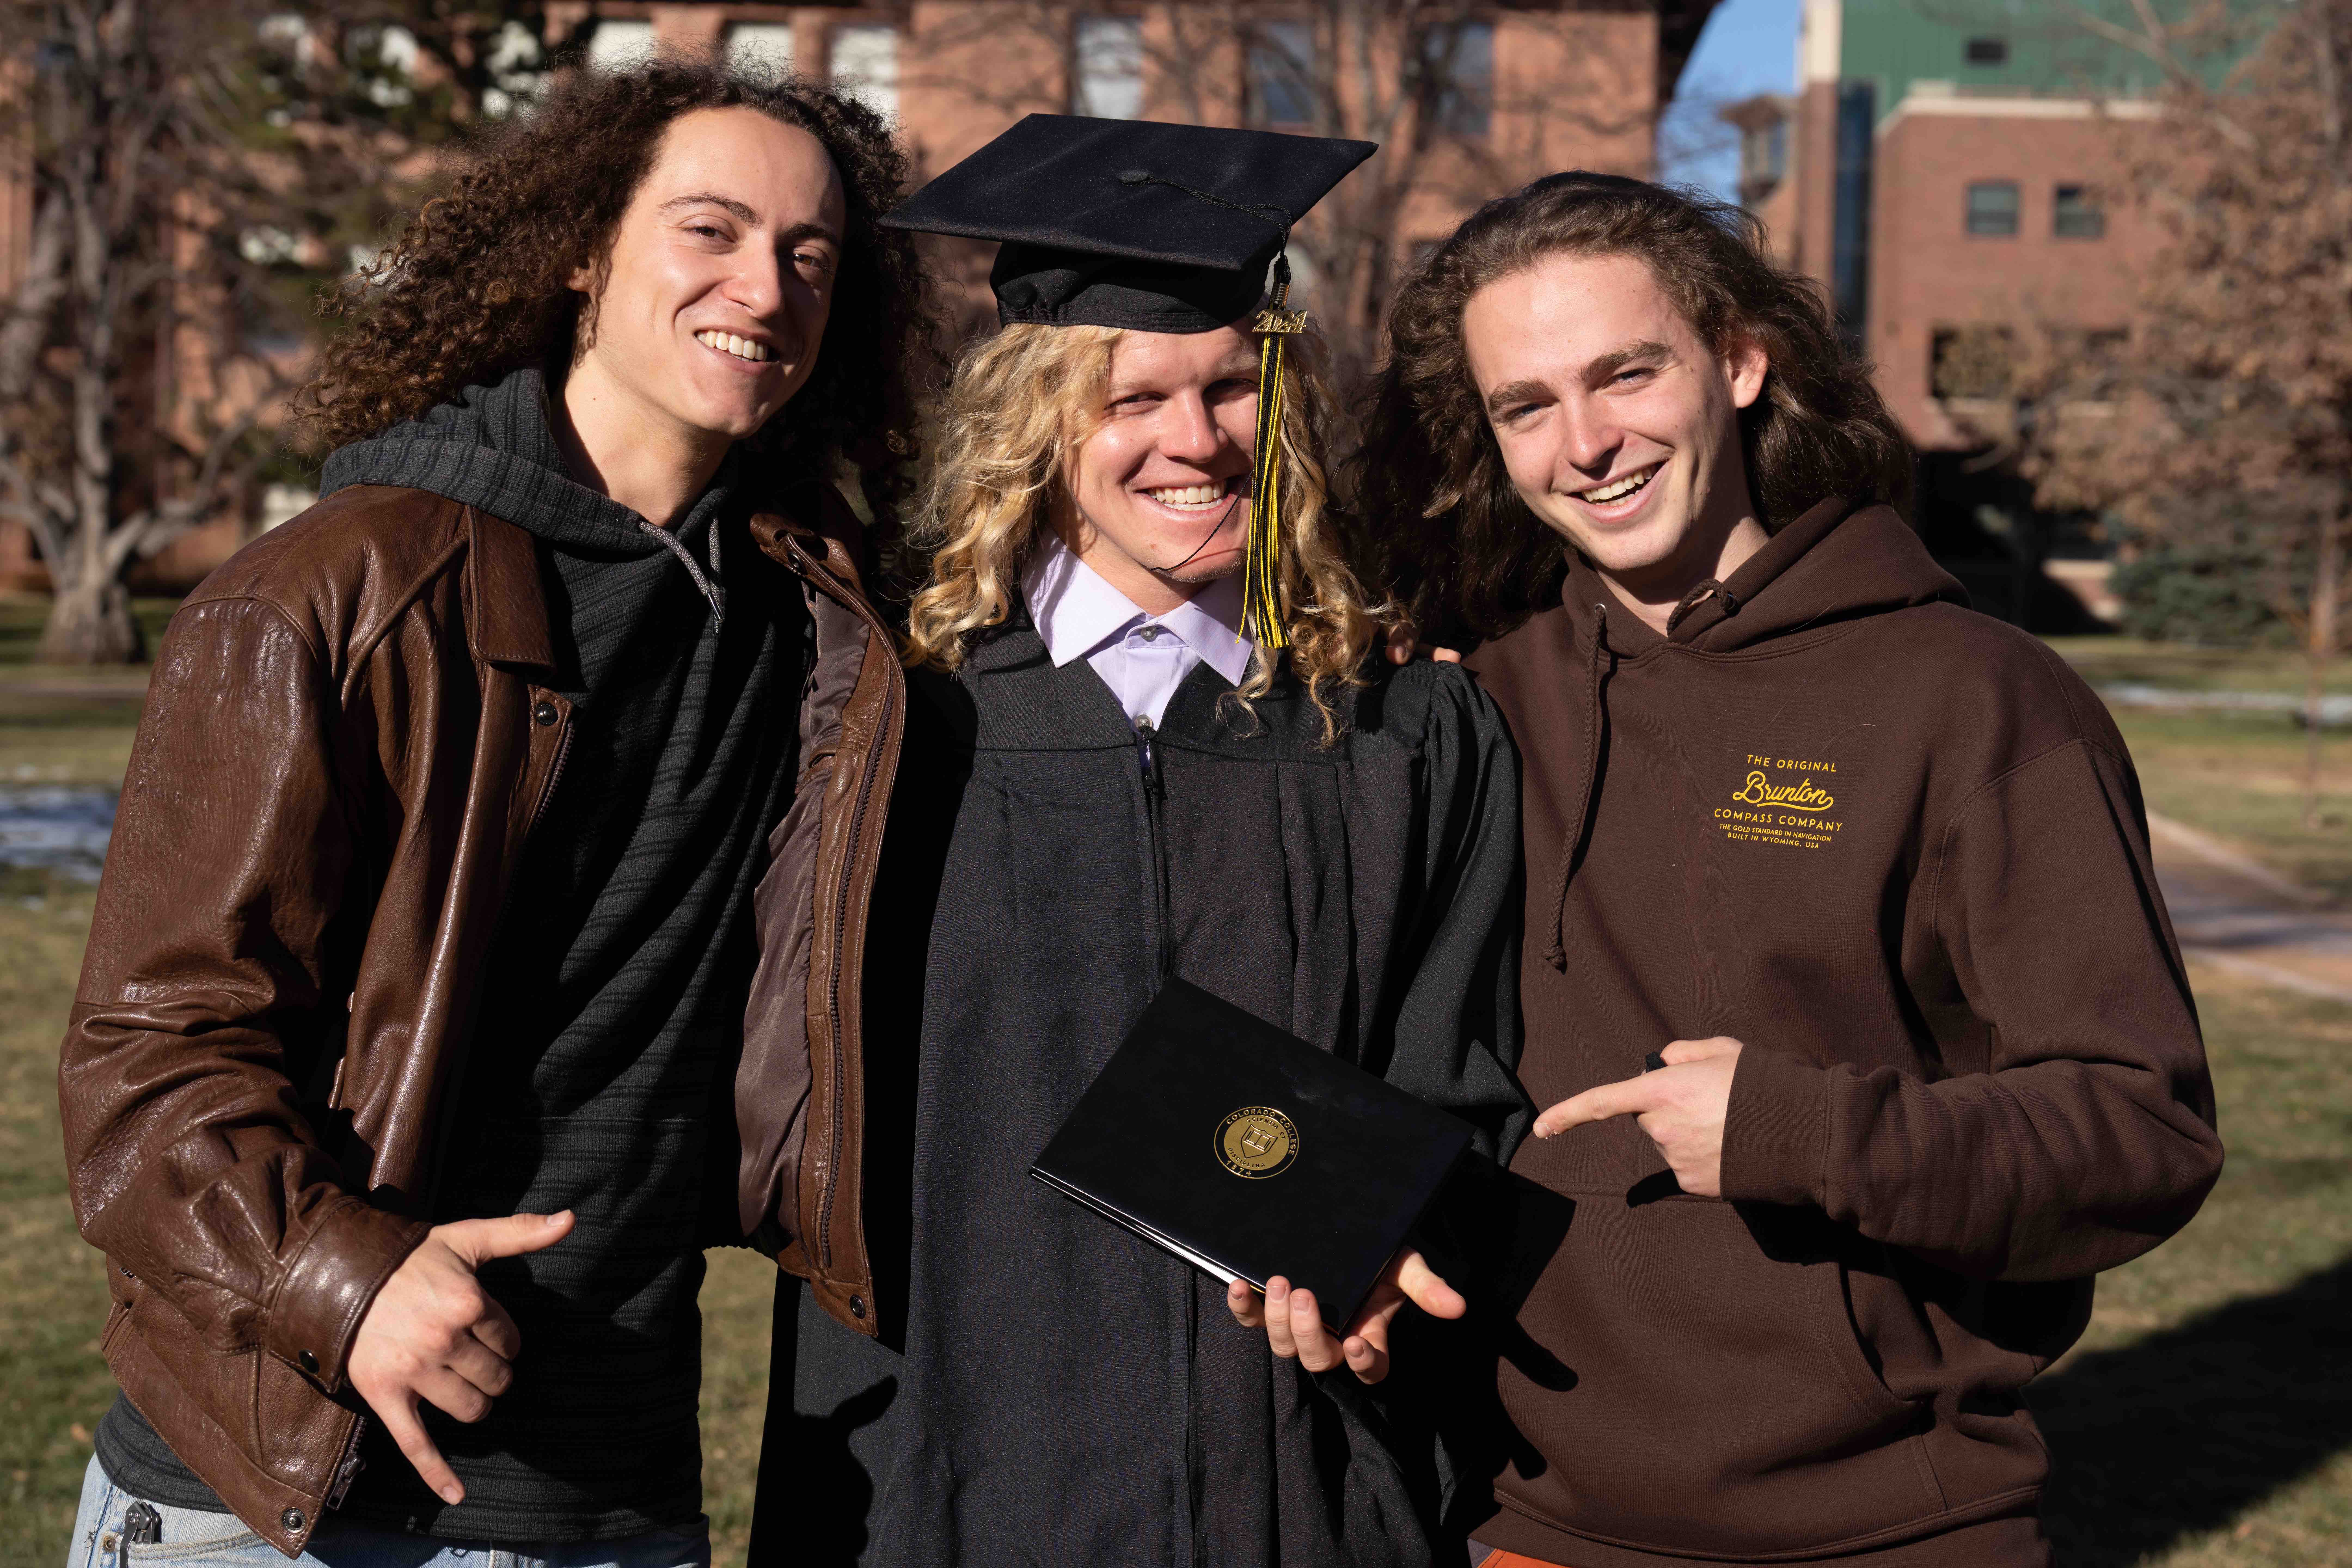 Friends celebrate the newly graduated CC student at Winter Commencement.